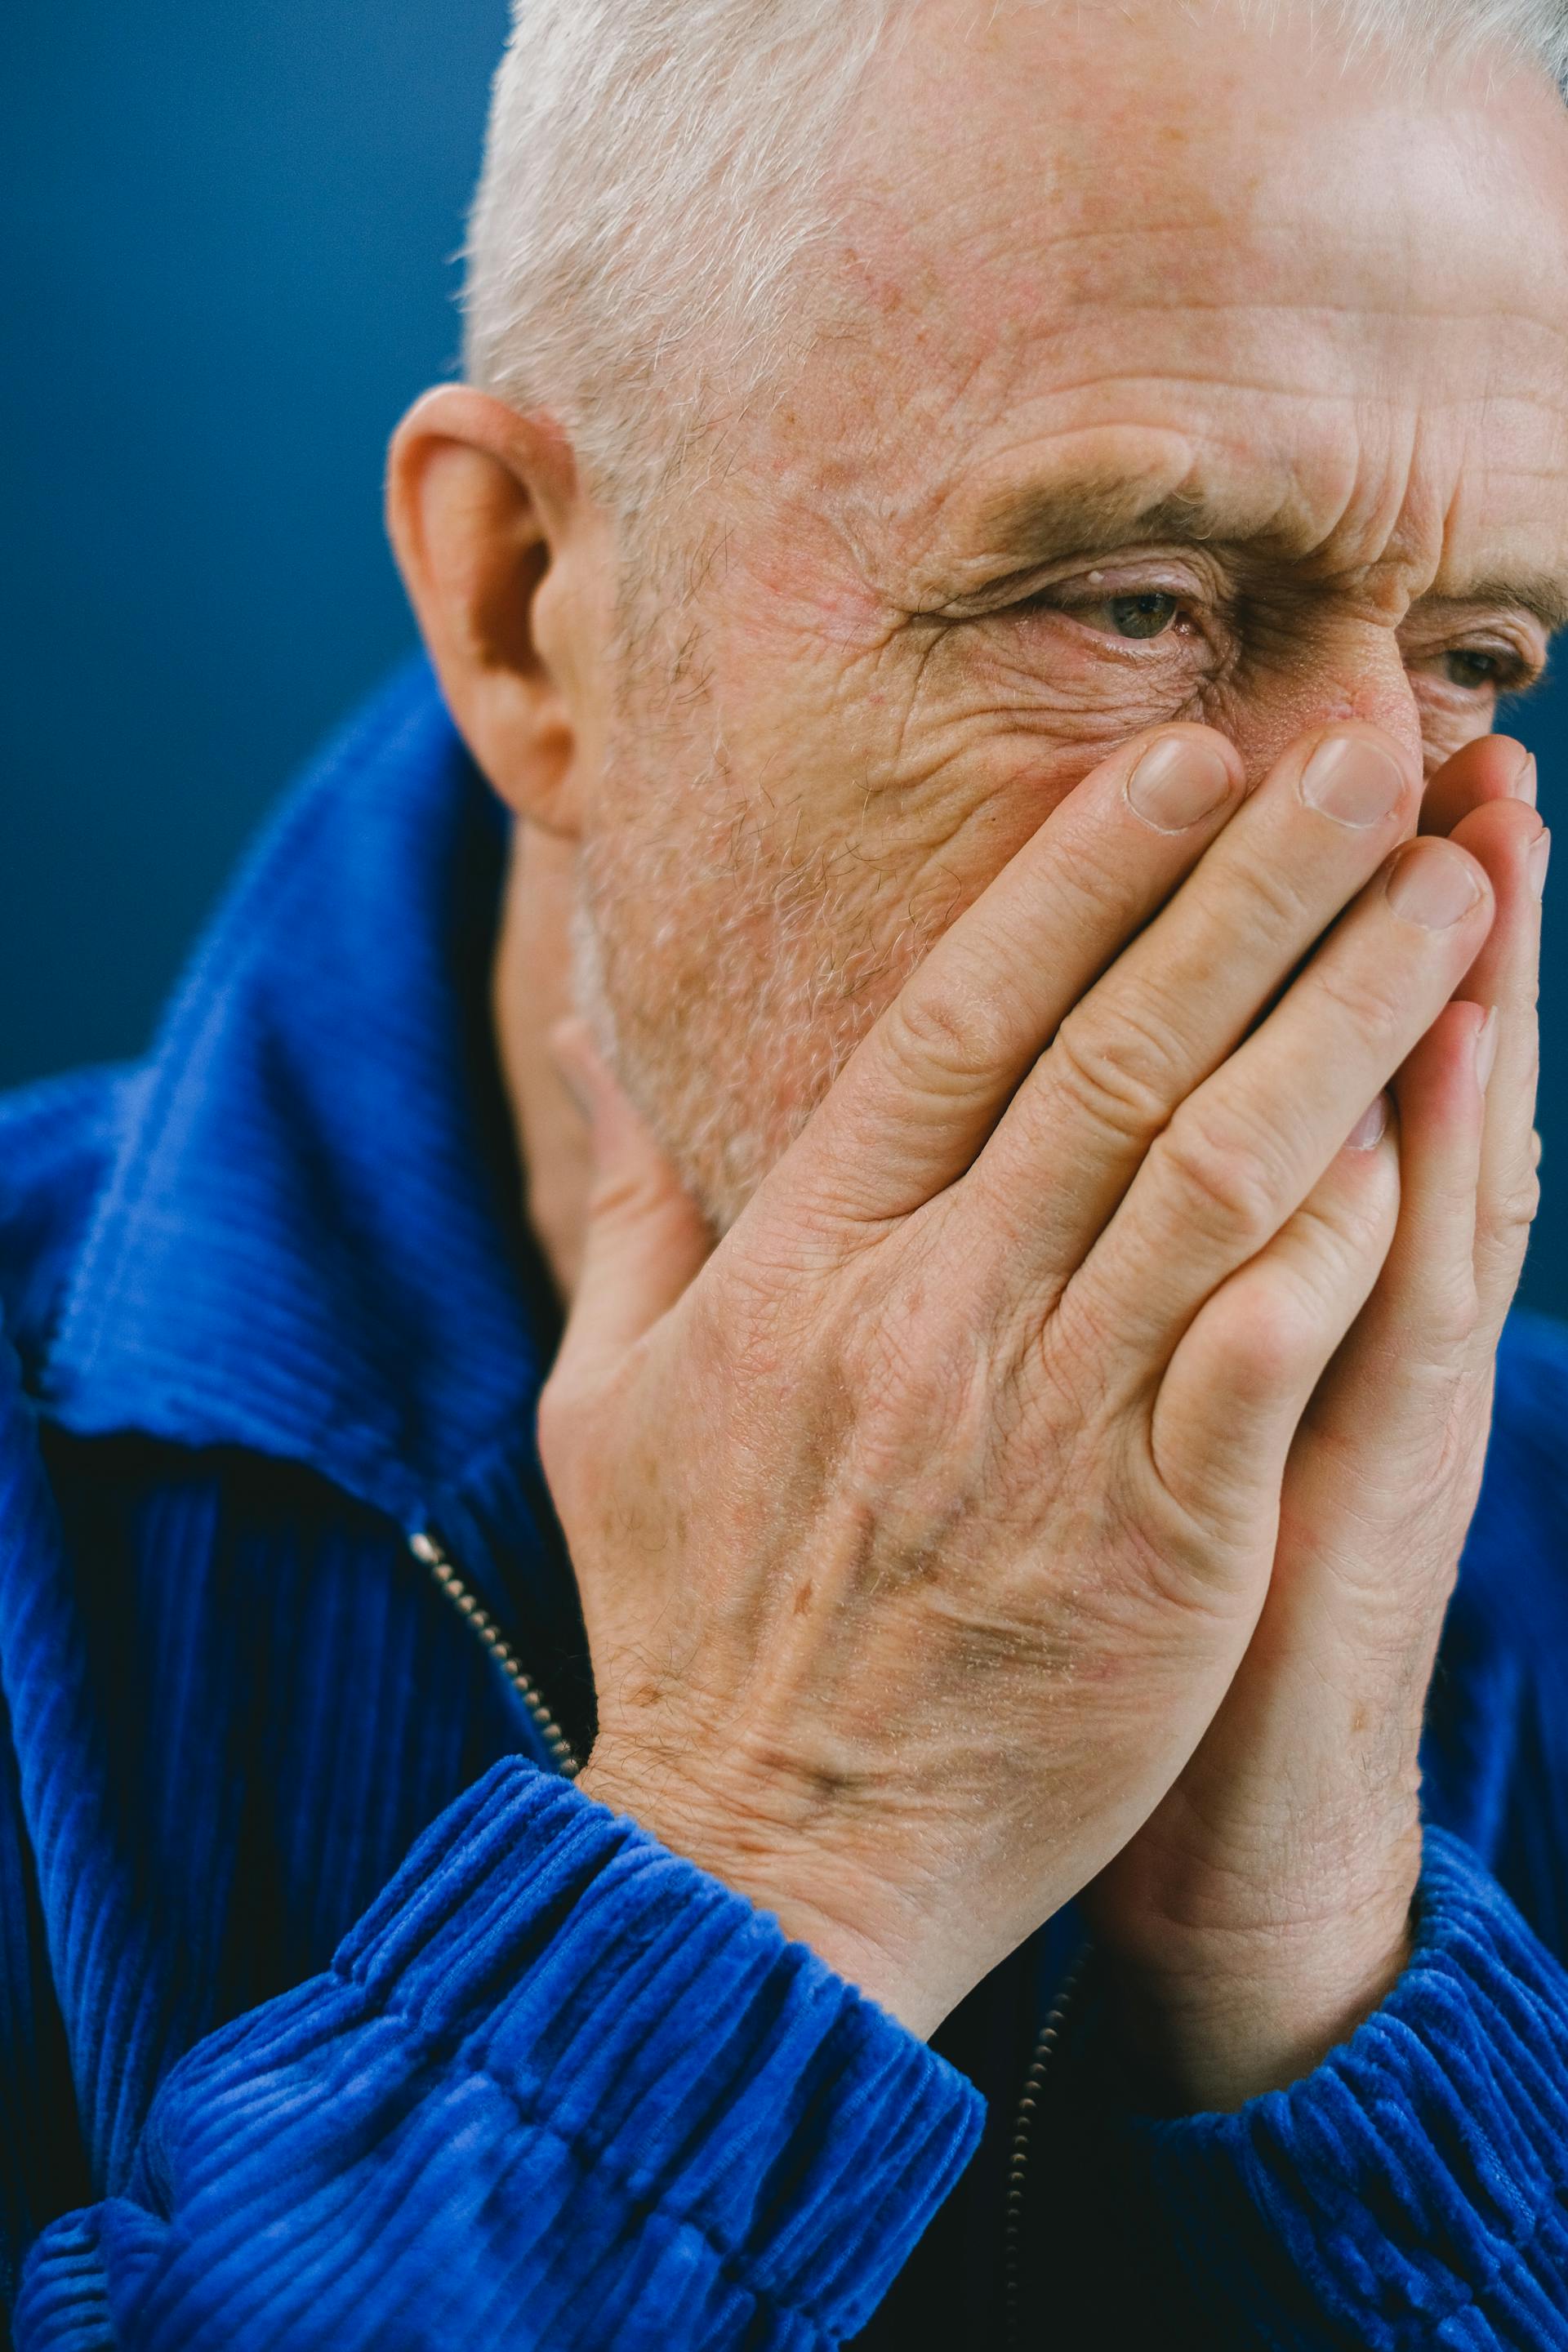 An elderly man covering his mouth | Source: Pexels